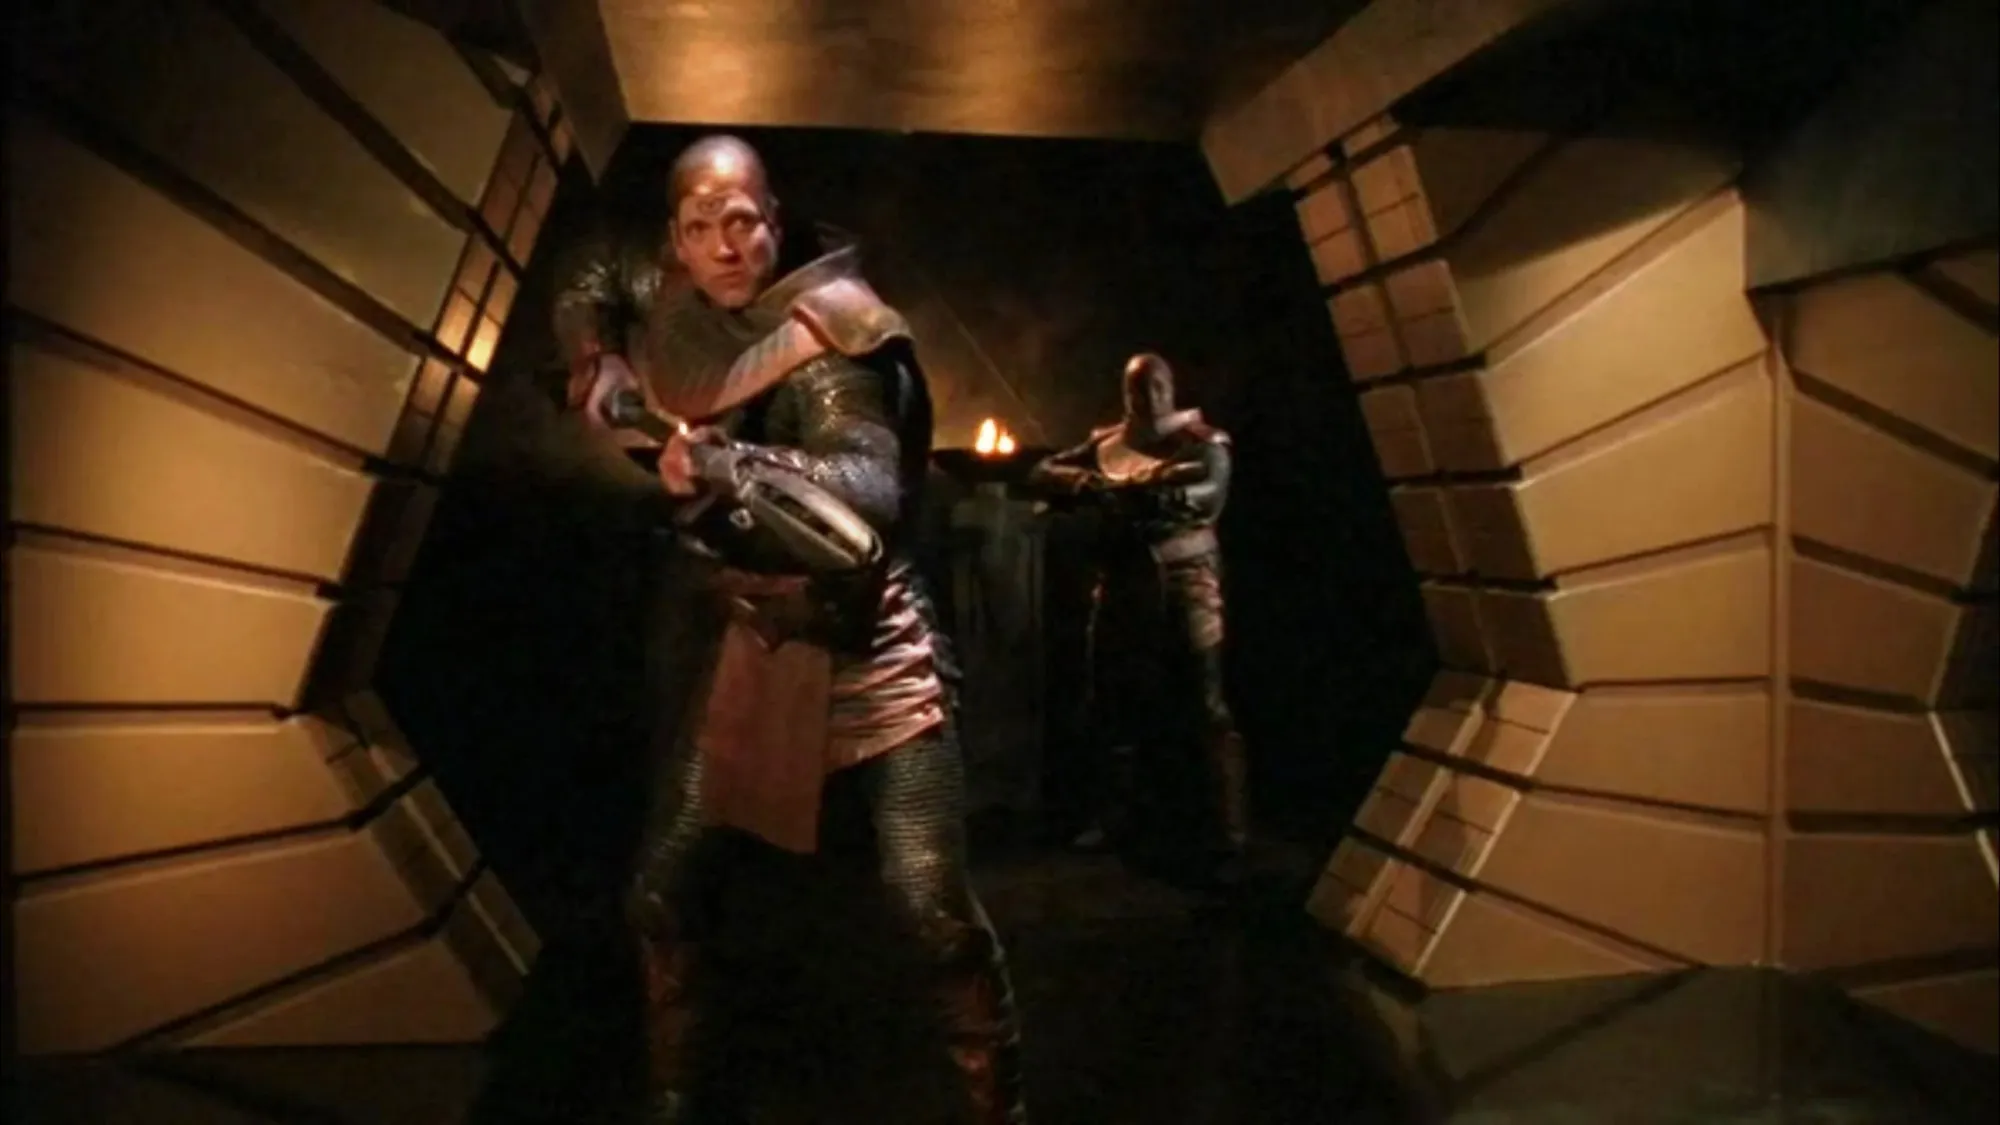 Two Jaffa warriors in golden armor with staff weapons in the Stargate SG-1 episode ‘Upgrades'. They are standing in the corridor of a ship with their staffs ready to fire.